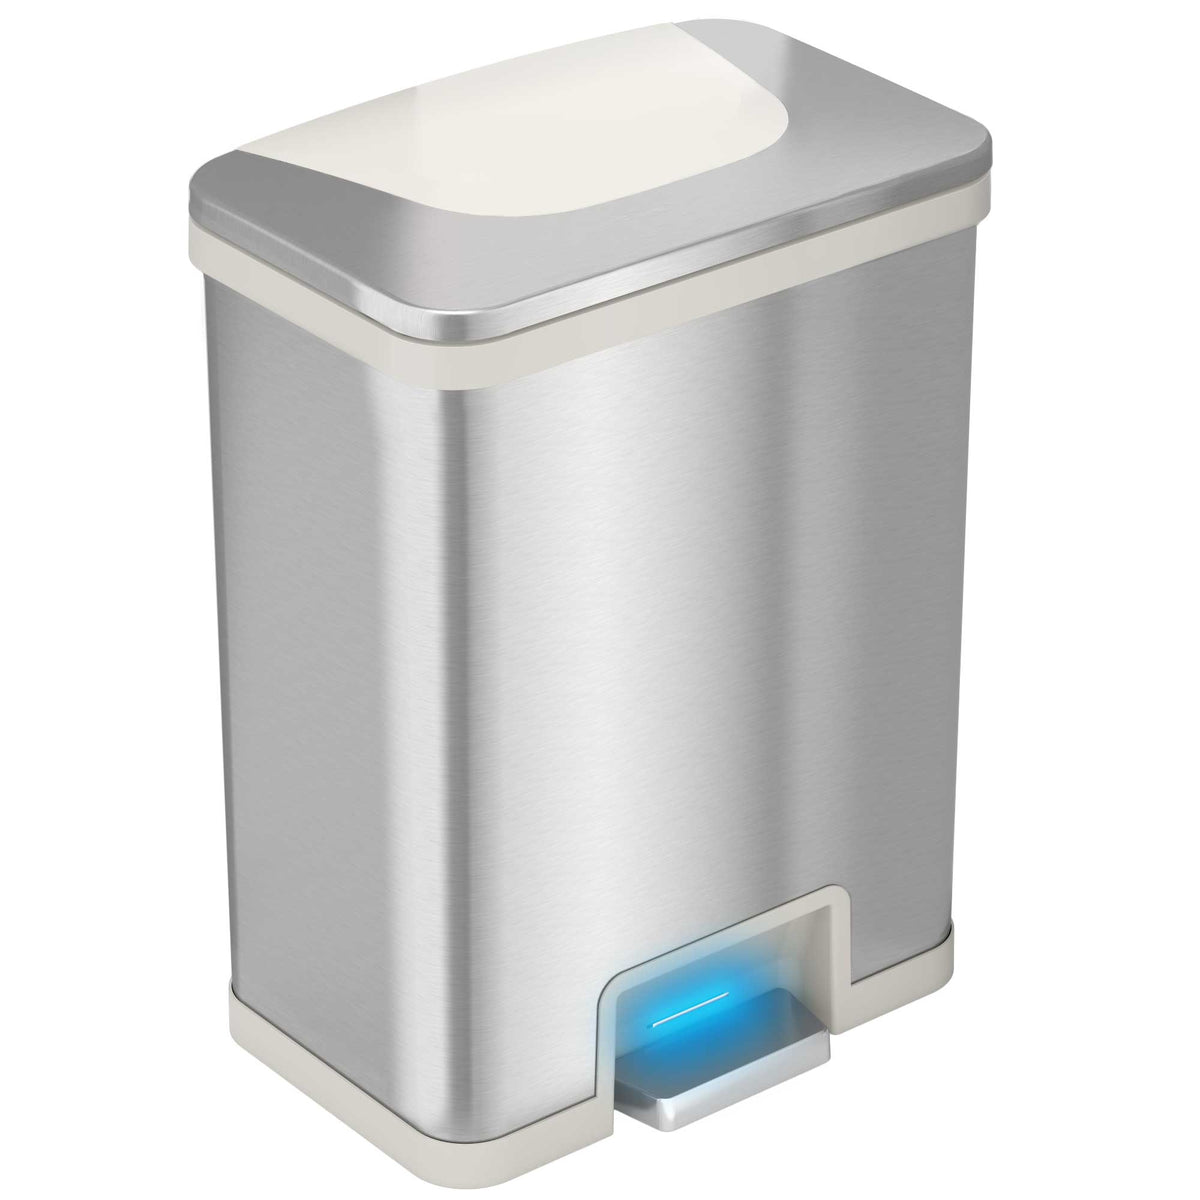 13 Gallon AutoStep Stainless Steel Pedal Sensor Trash Can (White Trim) 